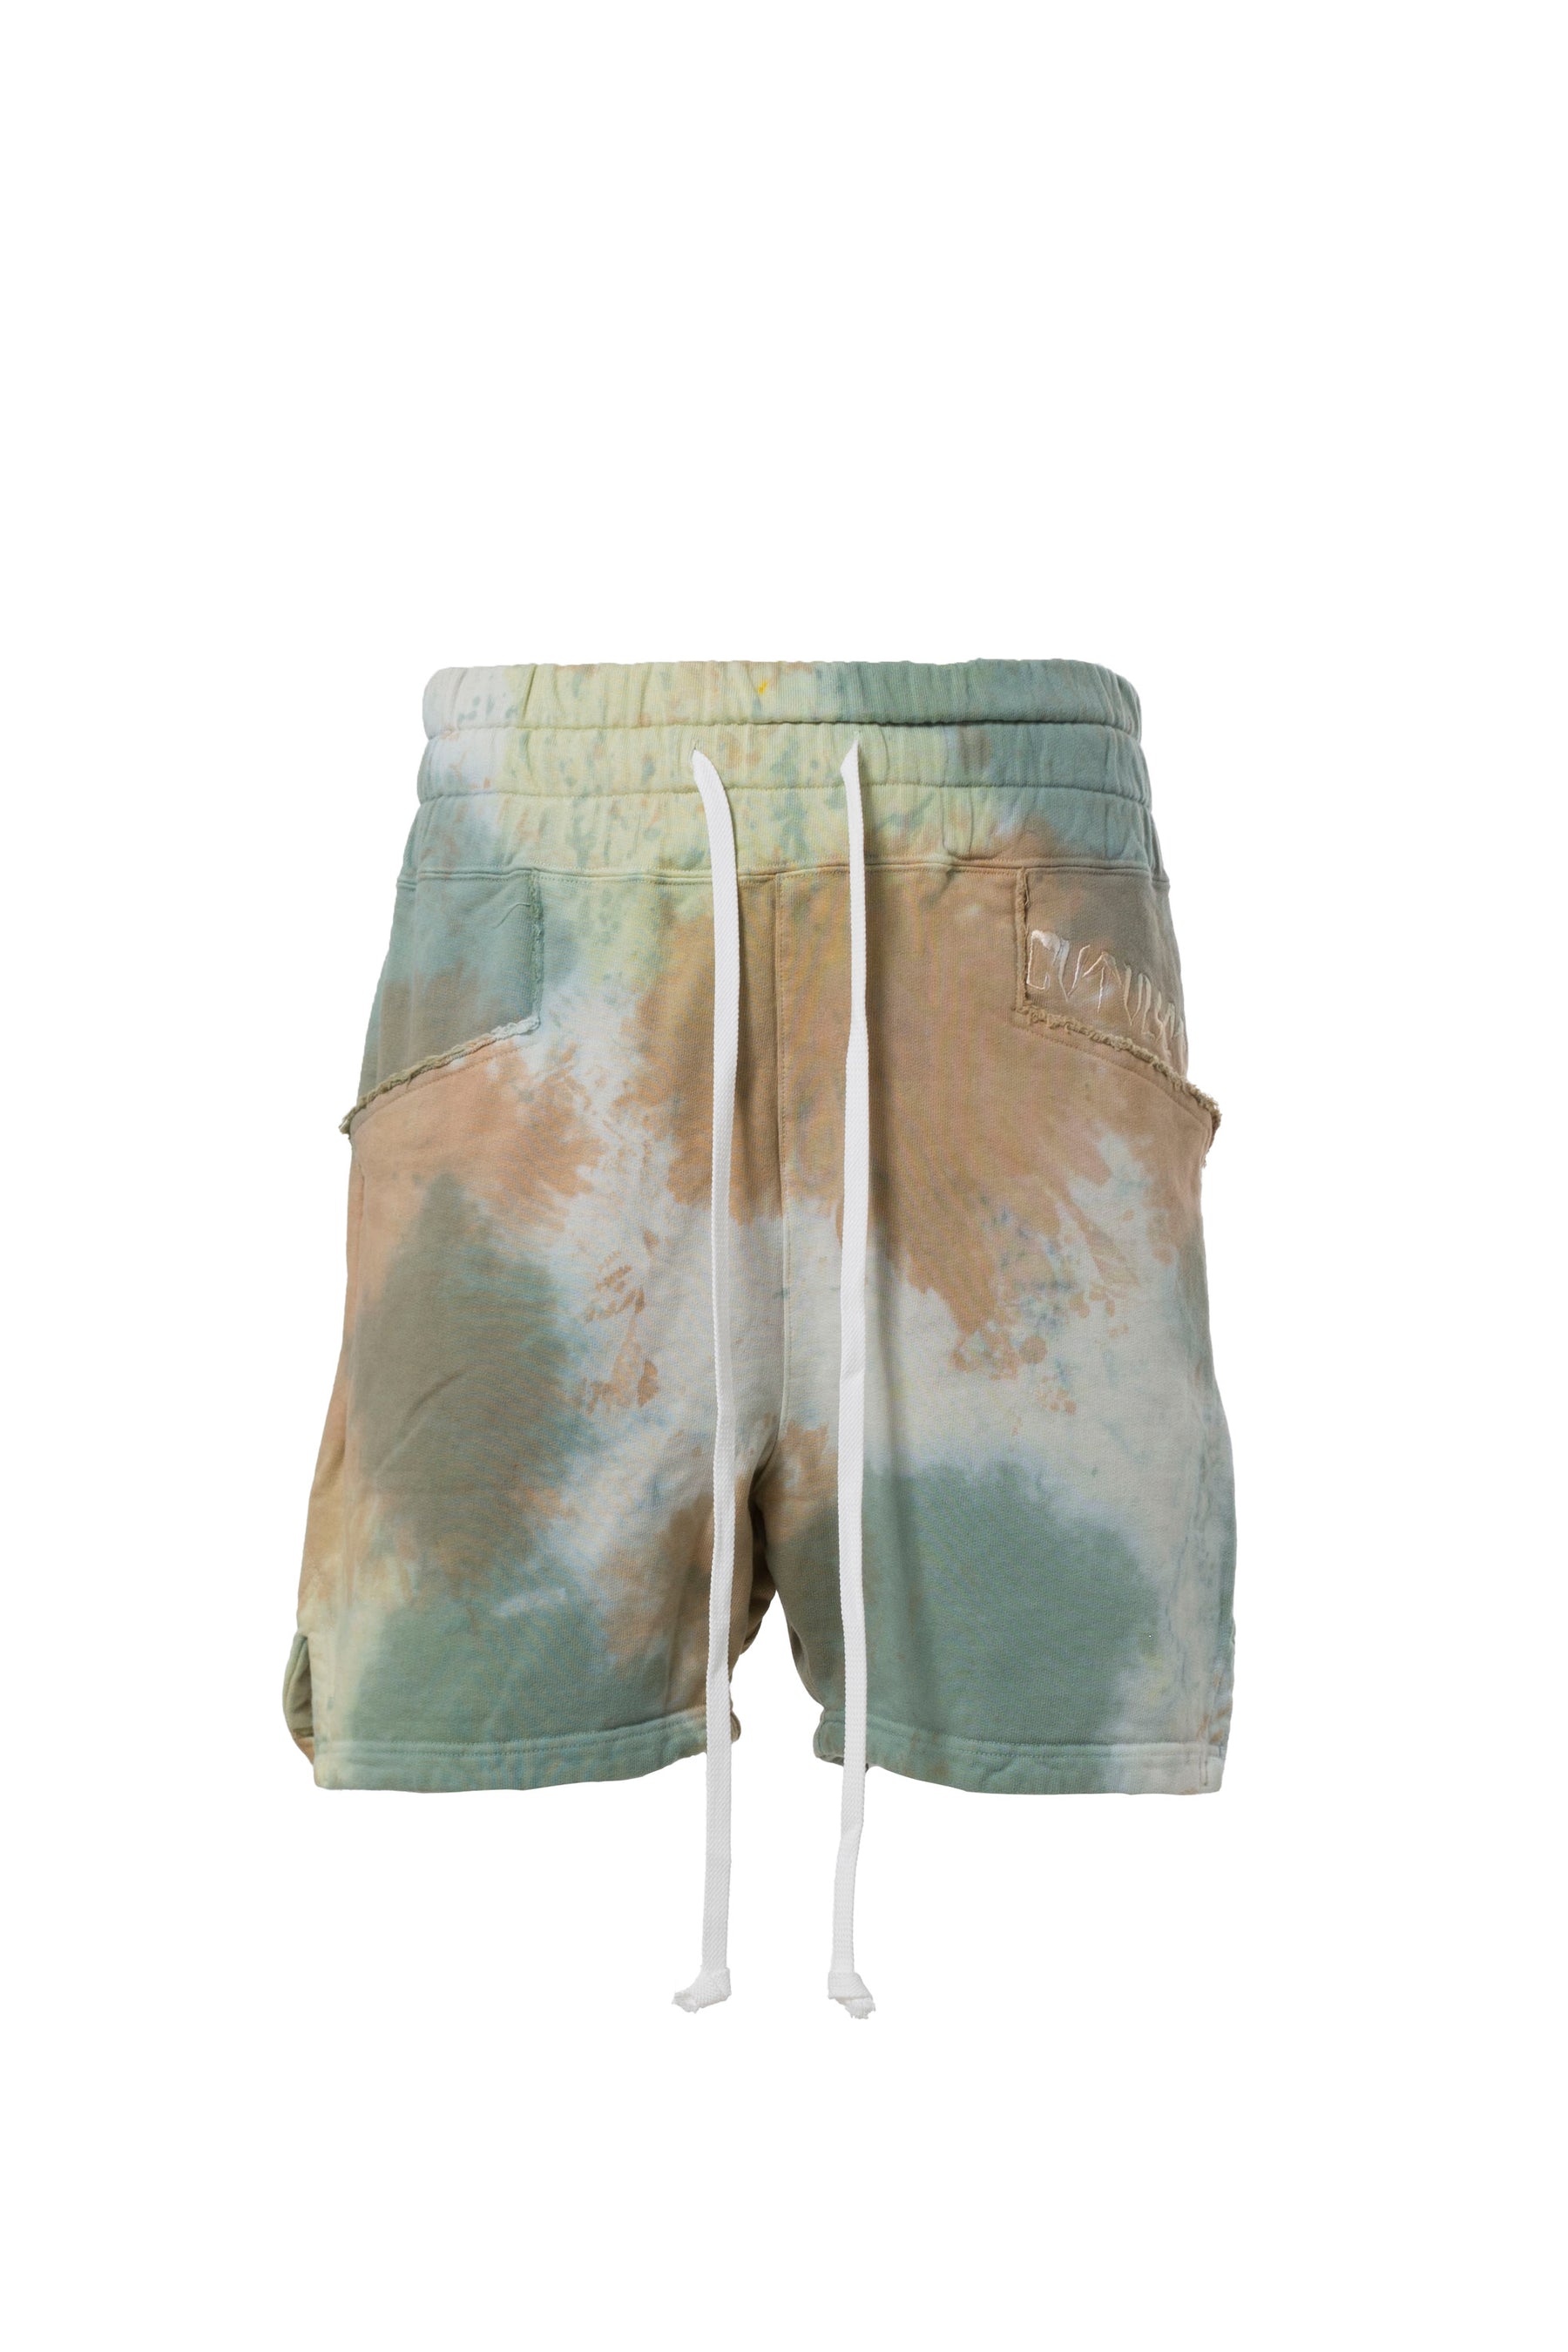 CVTVLIST SS23 CTLS USUAL SHORTS SPECIAL / MARBLE -NUBIAN